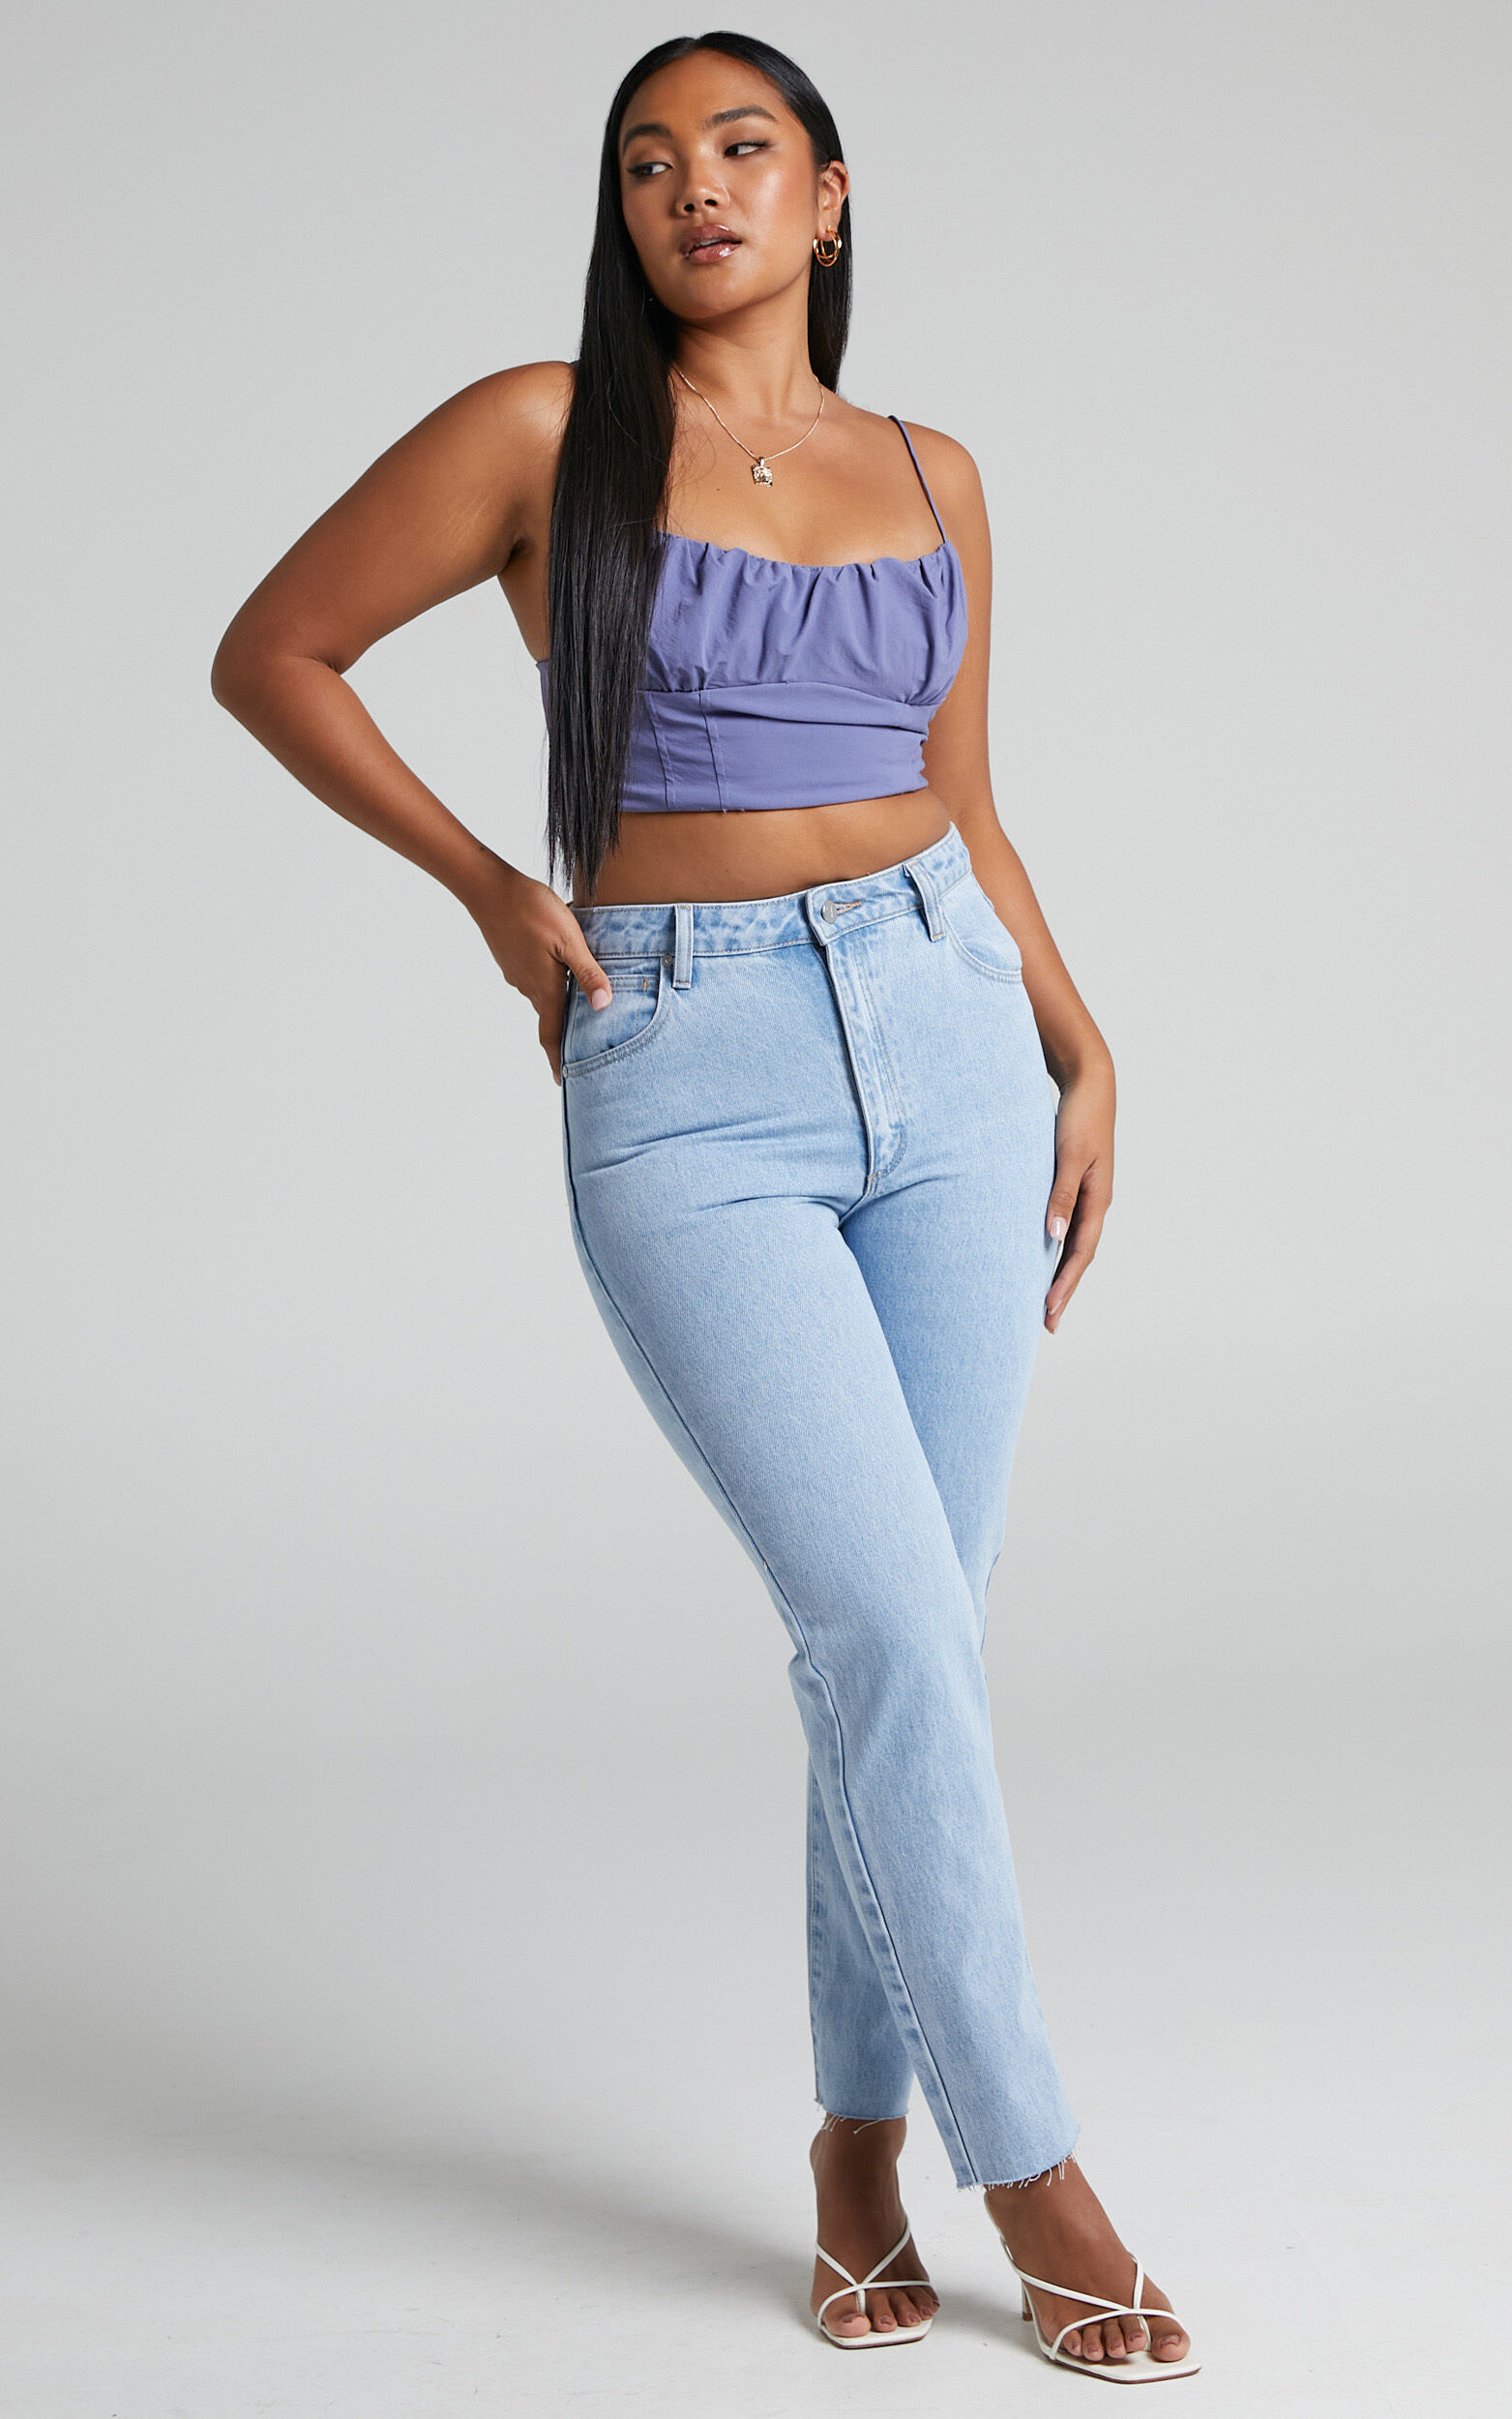 Keriana Gathered Front Corset Crop Top in Steel Blue - 06, BLU1, super-hi-res image number null